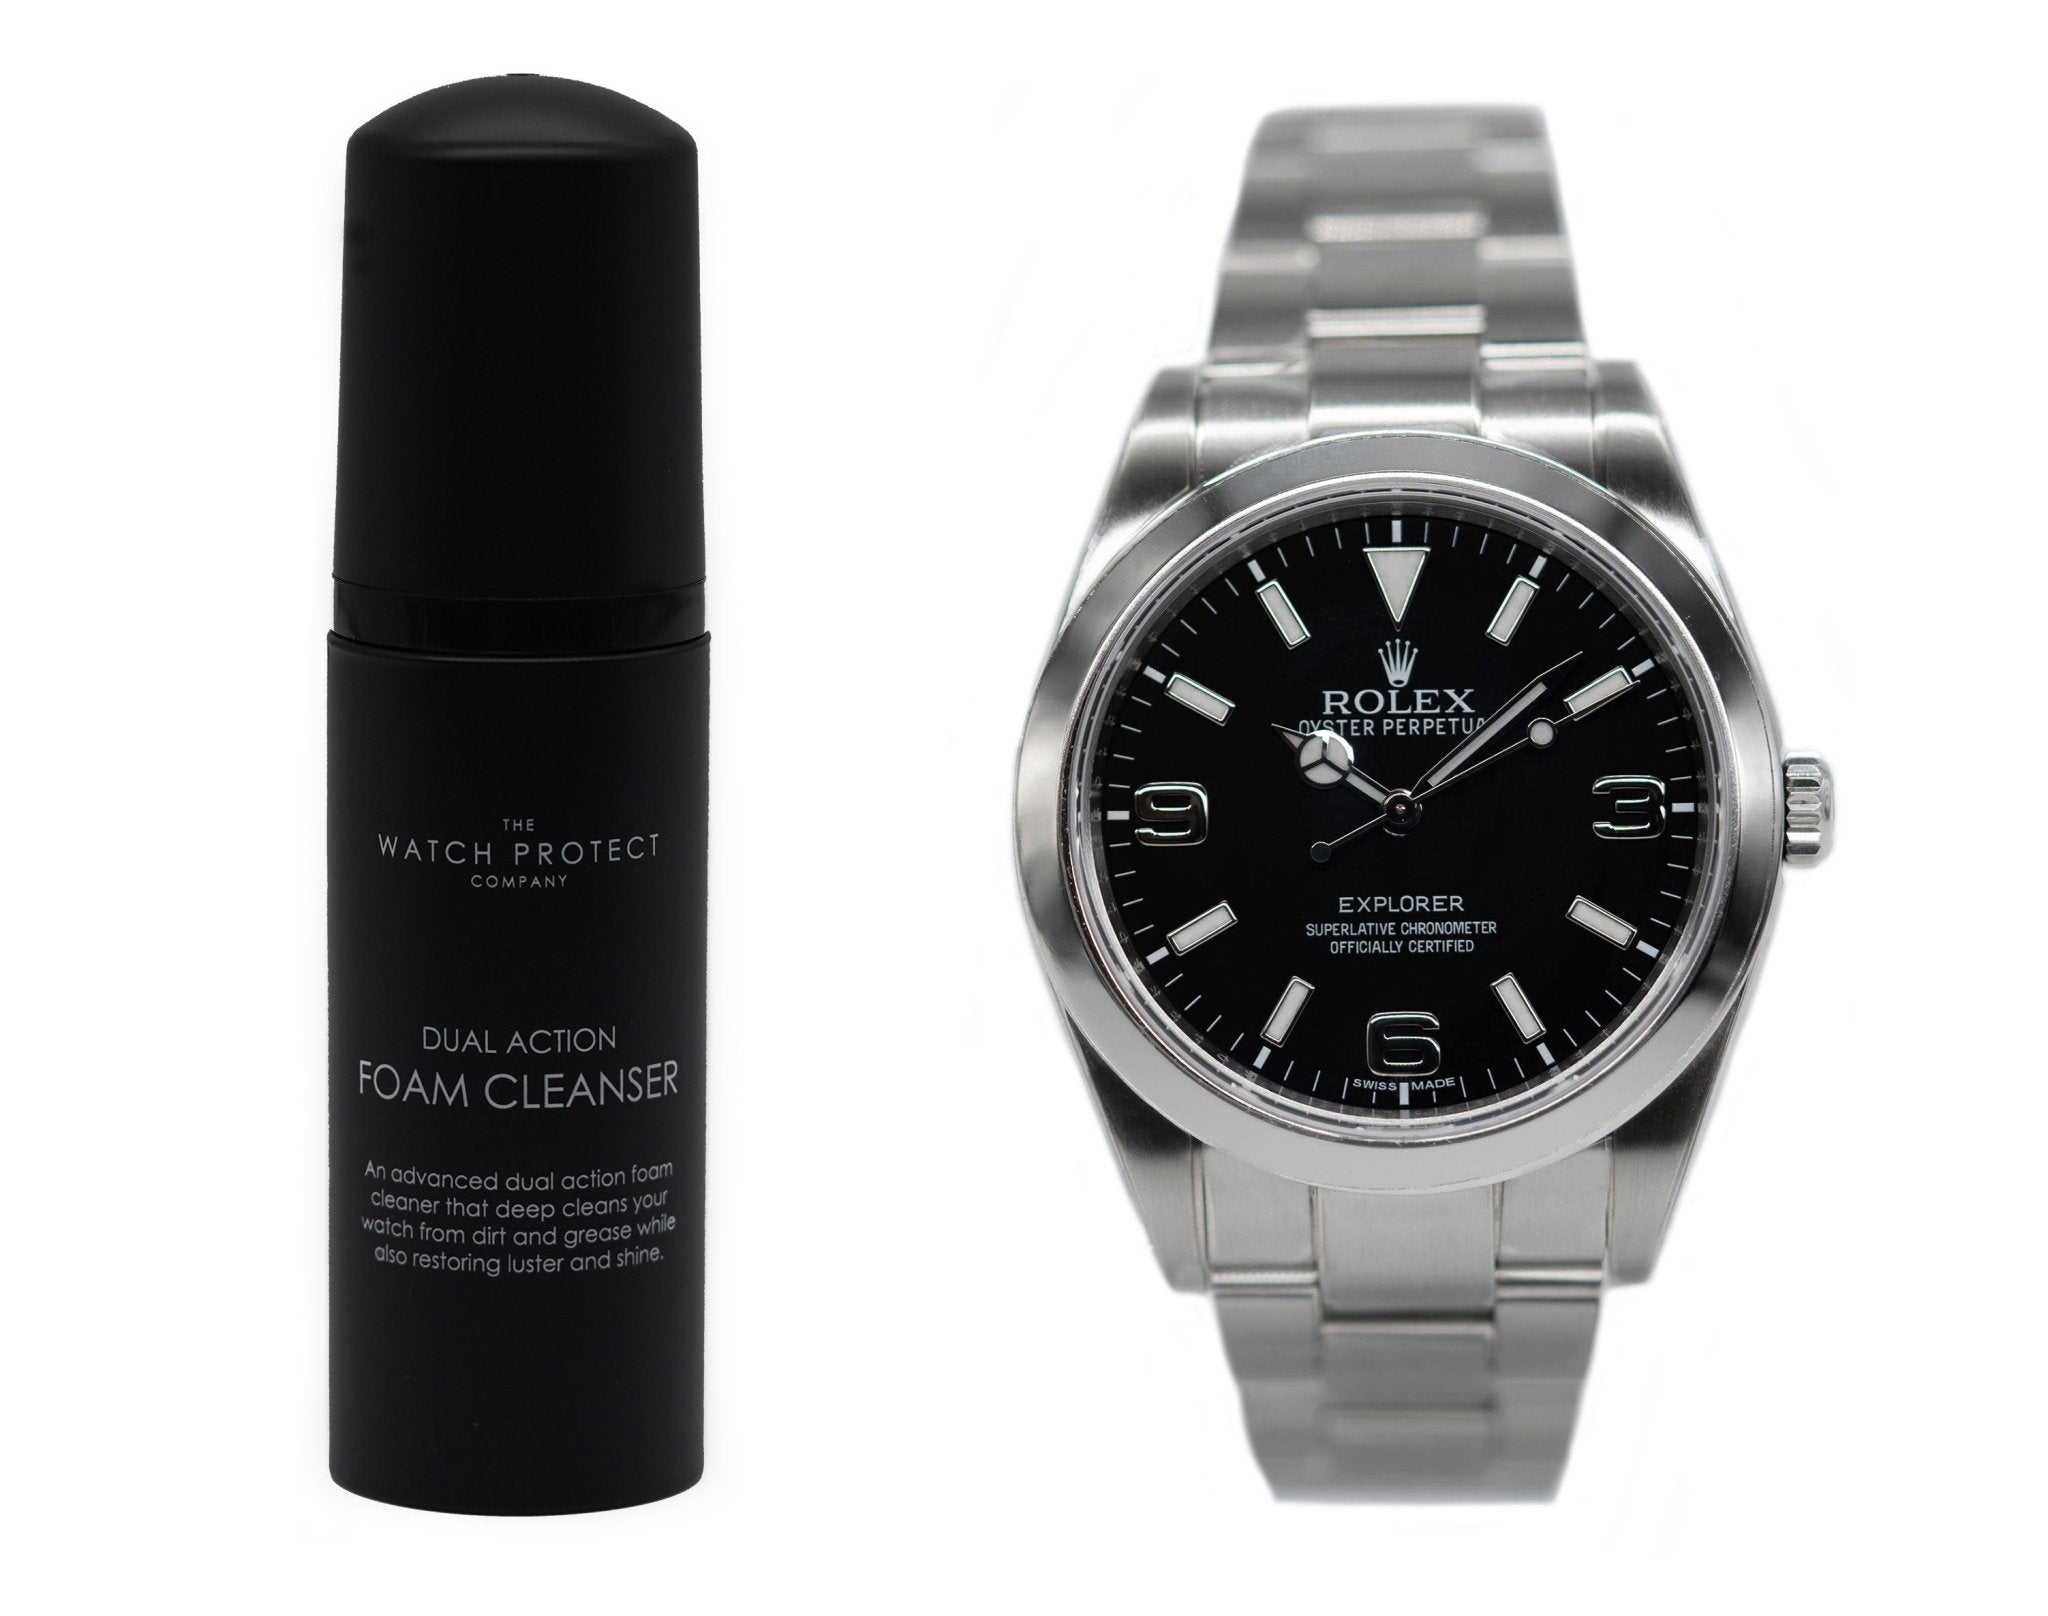 DUAL ACTION FOAM CLEANER & ROLEX EXPLORER 214270 - TIER 3 - WATCH PROTECTION KIT BUNDLE - The Watch Protect Company